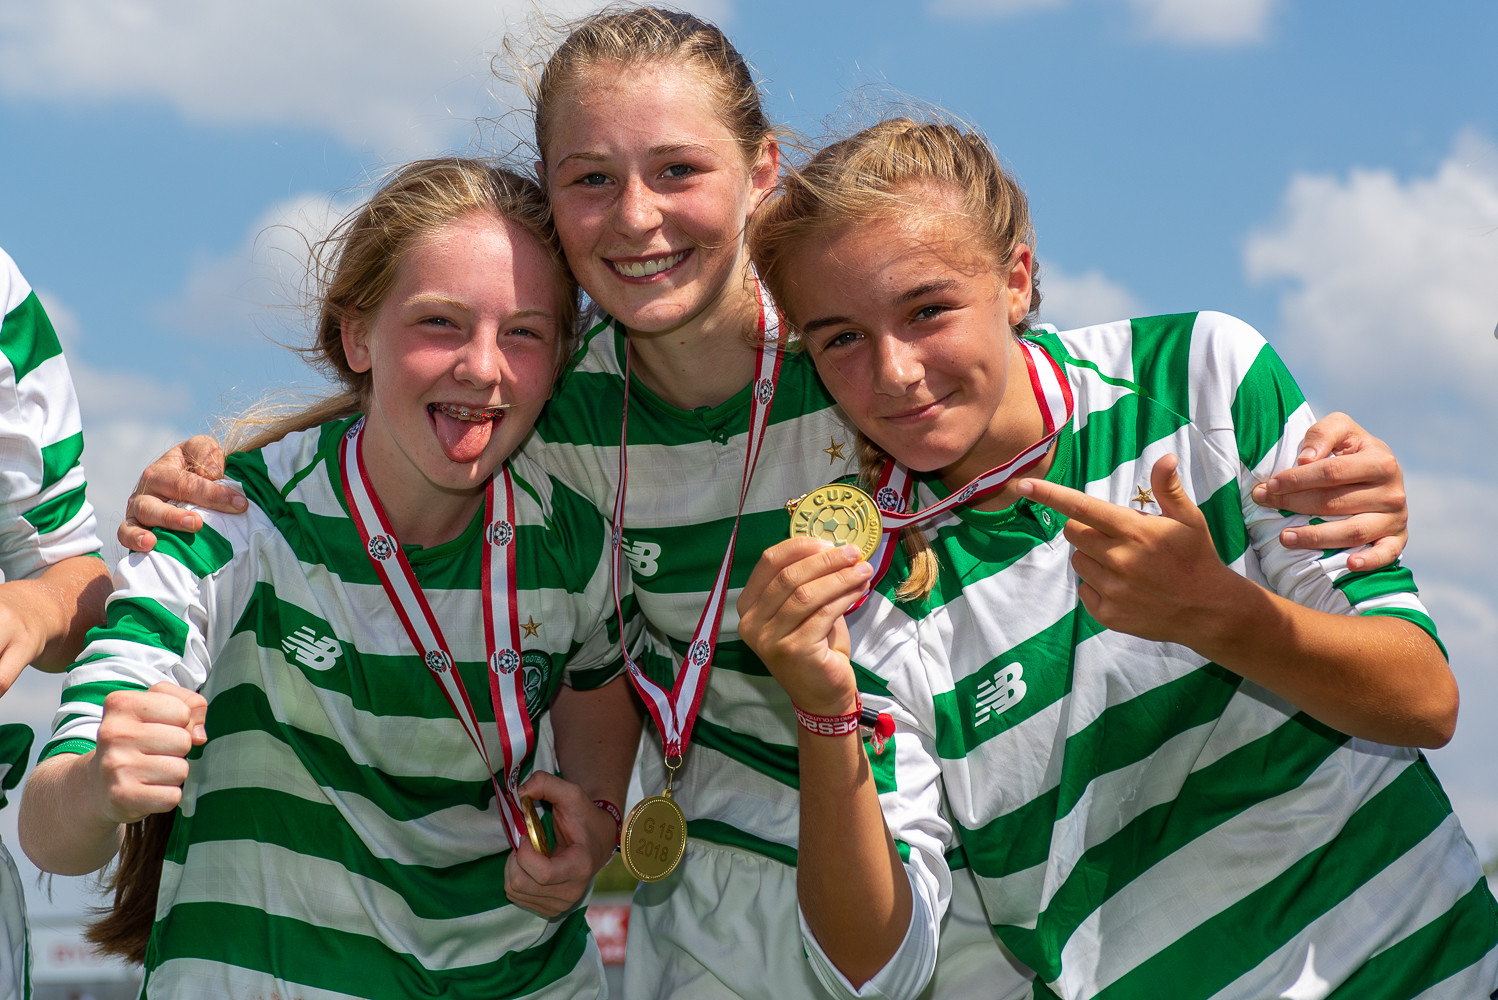 Dana Cup - girls with medals - Road to Sport